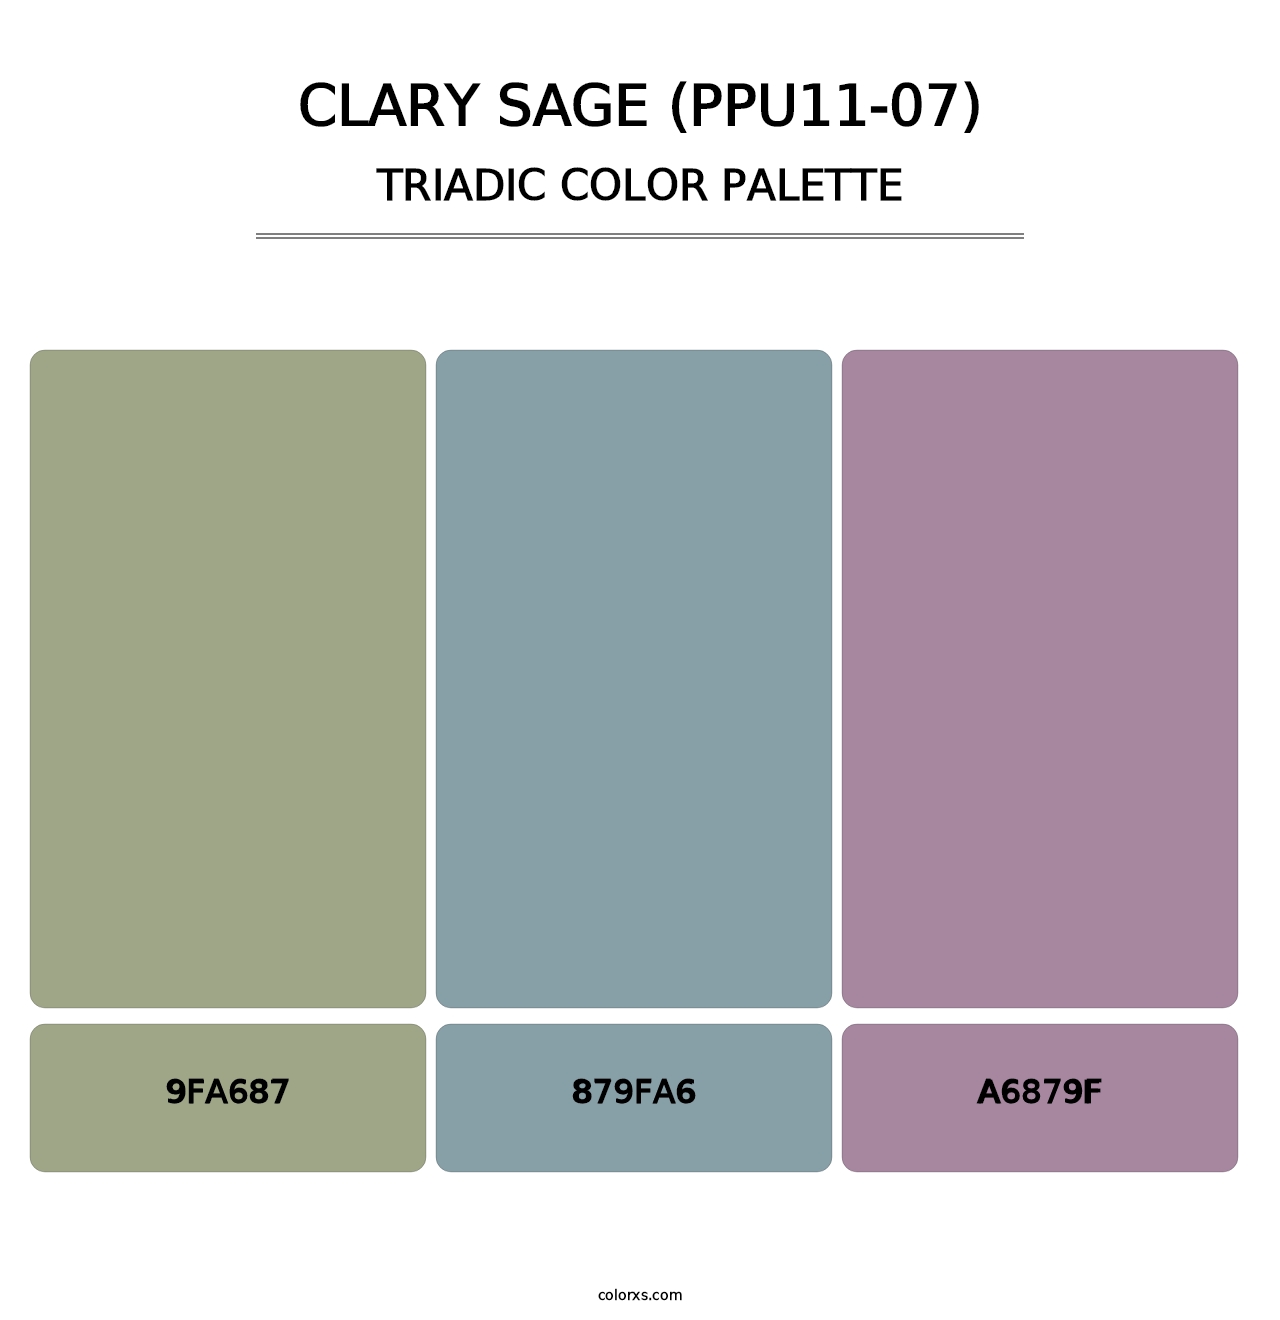 Clary Sage (PPU11-07) - Triadic Color Palette